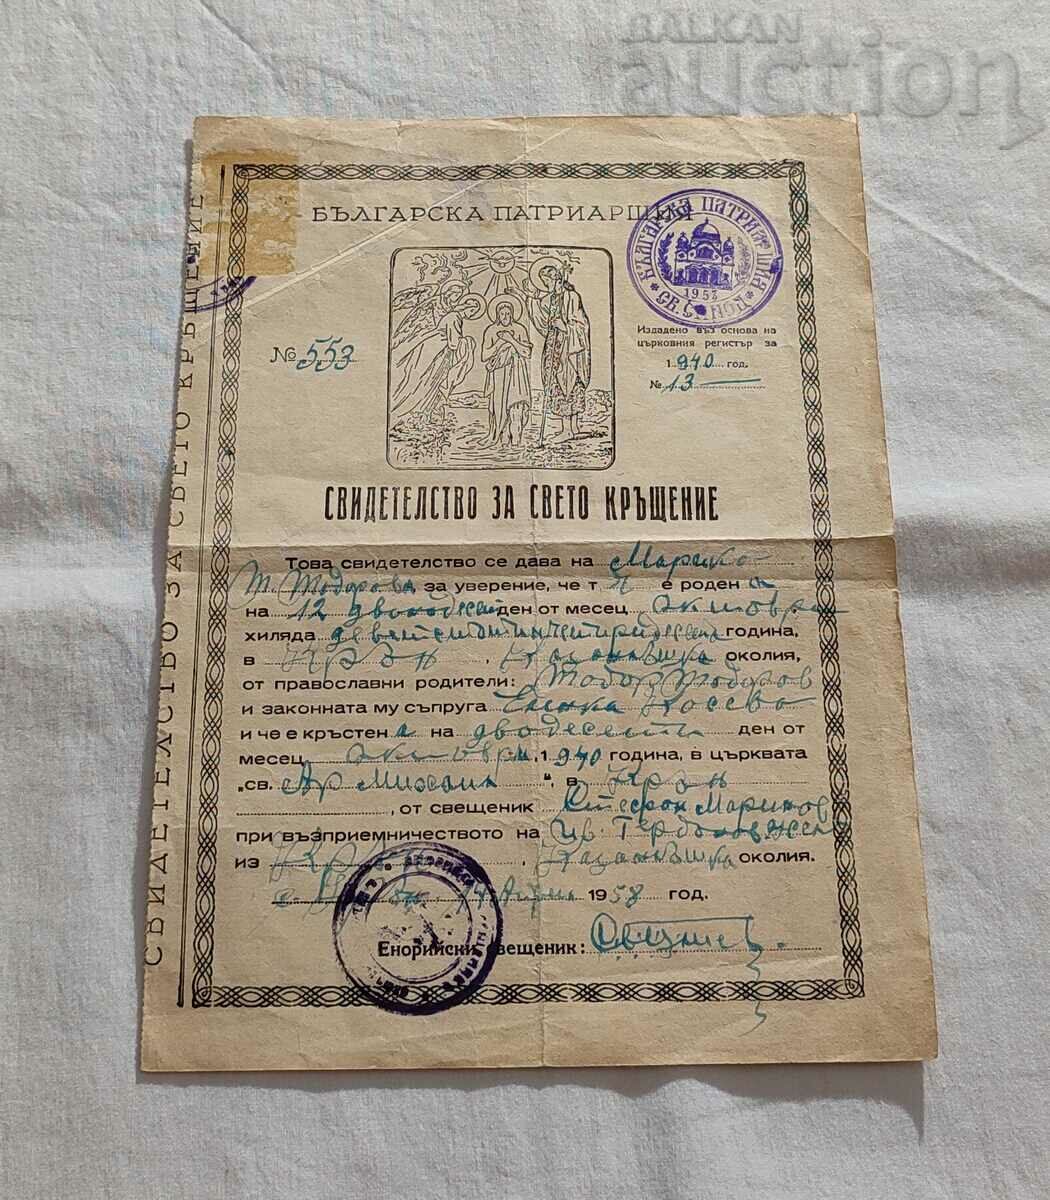 CERTIFICATE OF HOLY BAPTISM BULGARIA PATRIARCHY 1958 with KRON